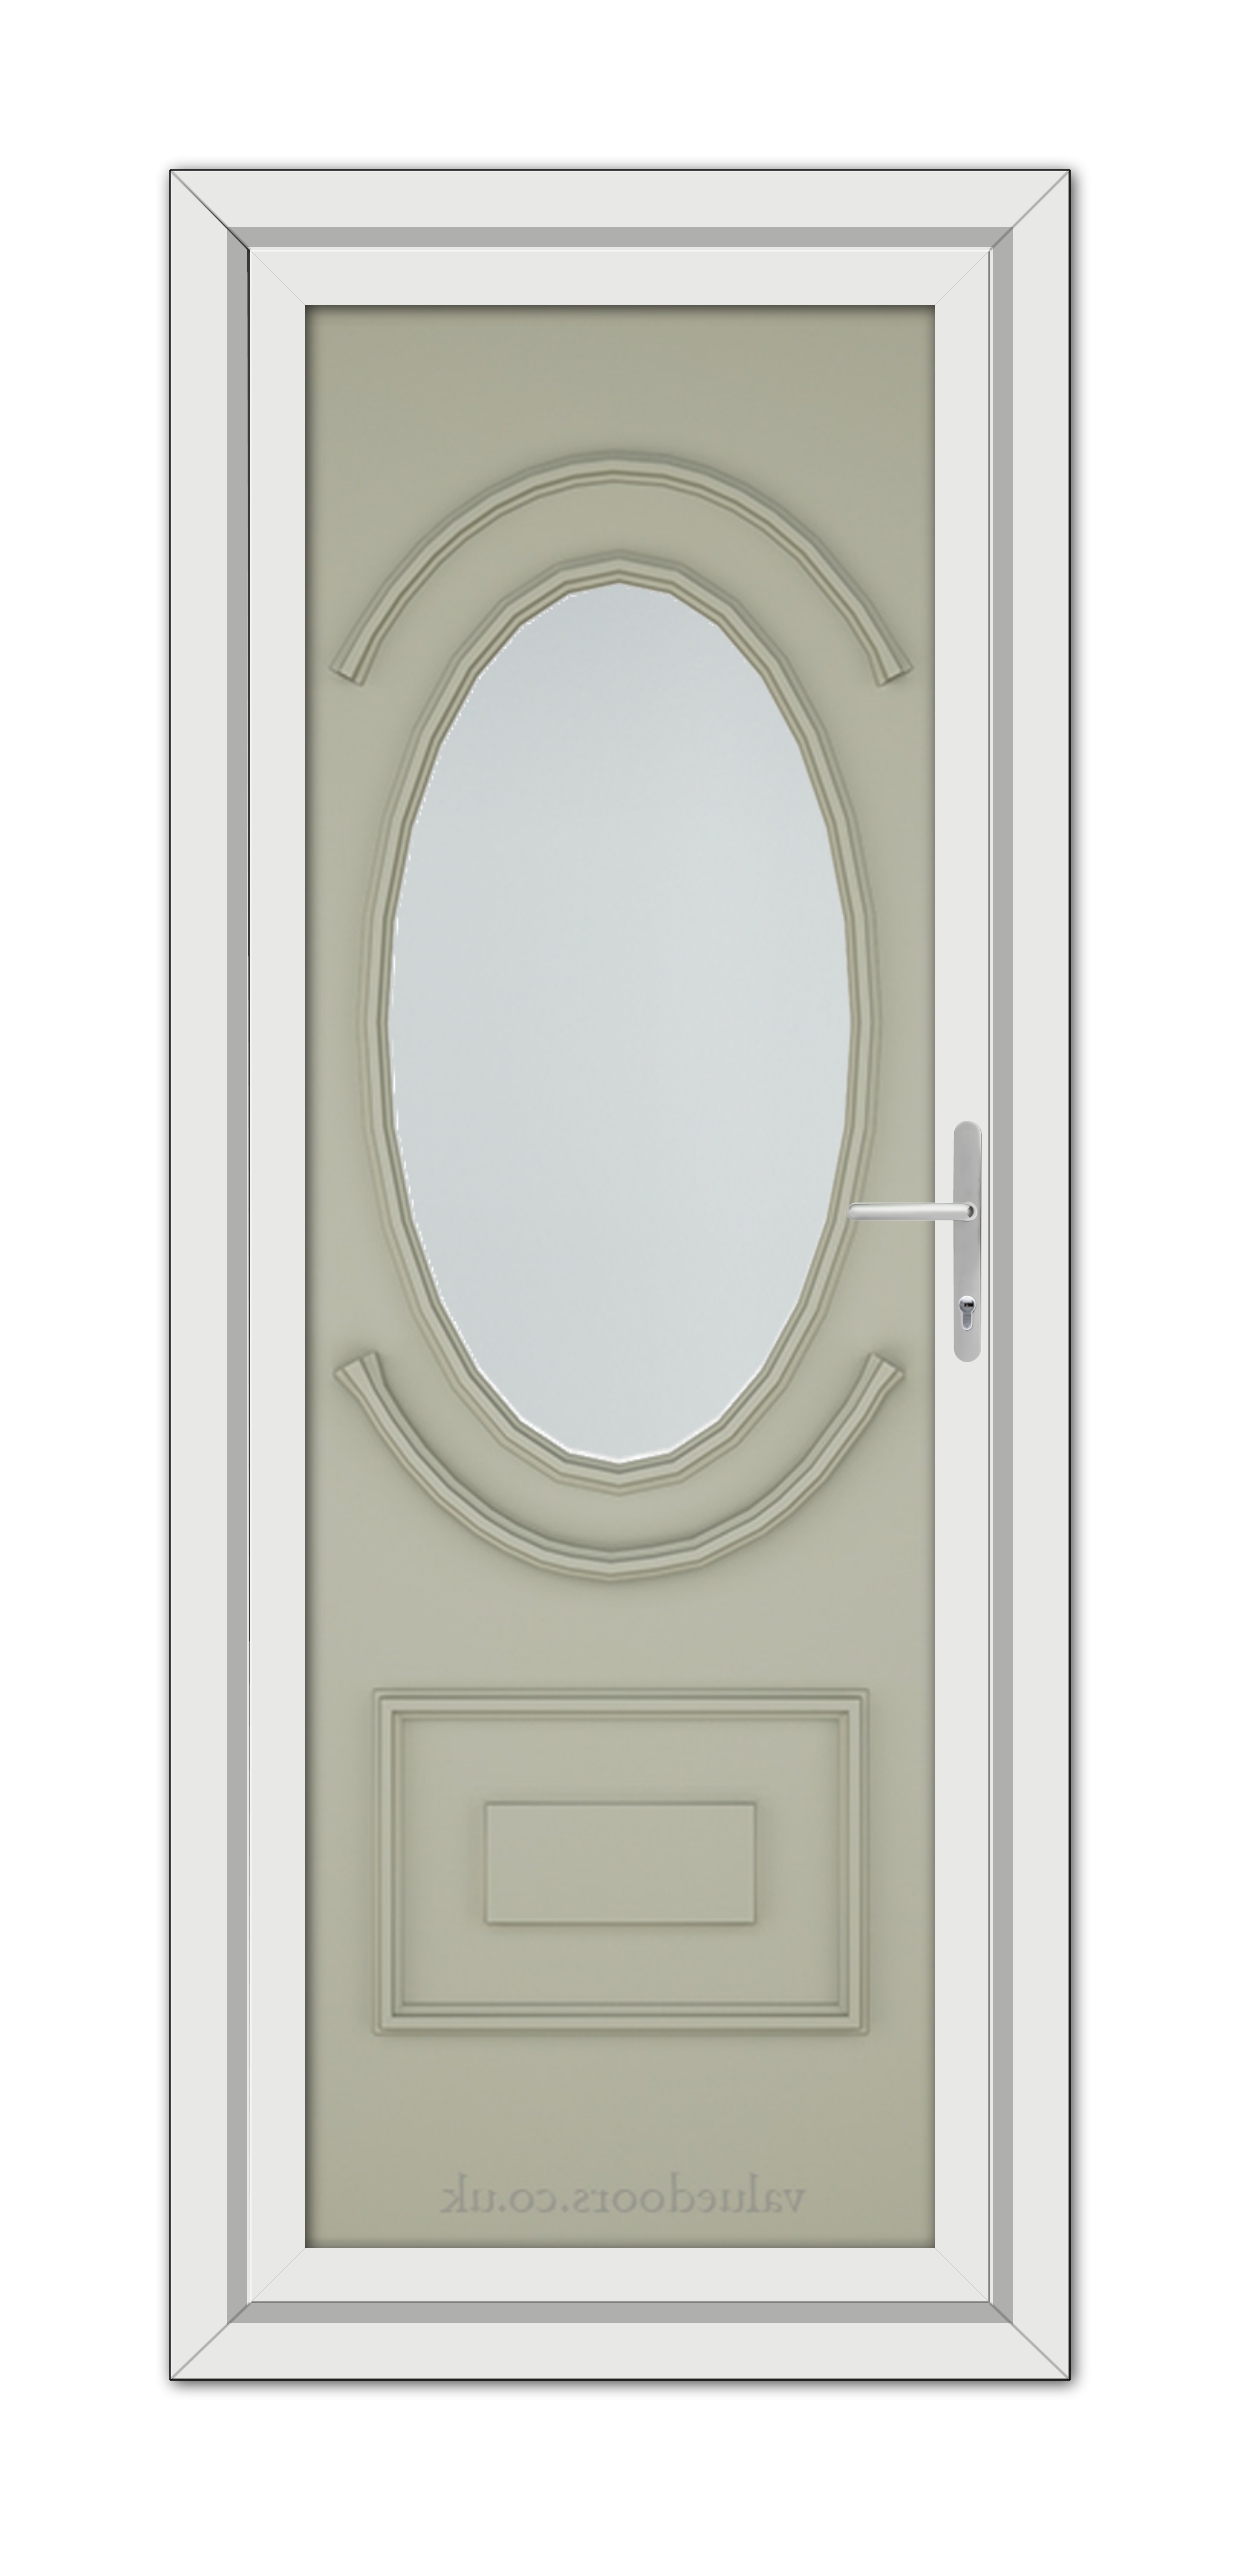 A modern Agate Grey Richmond uPVC door with an oval-shaped glass panel and a metal handle, set within a white frame.